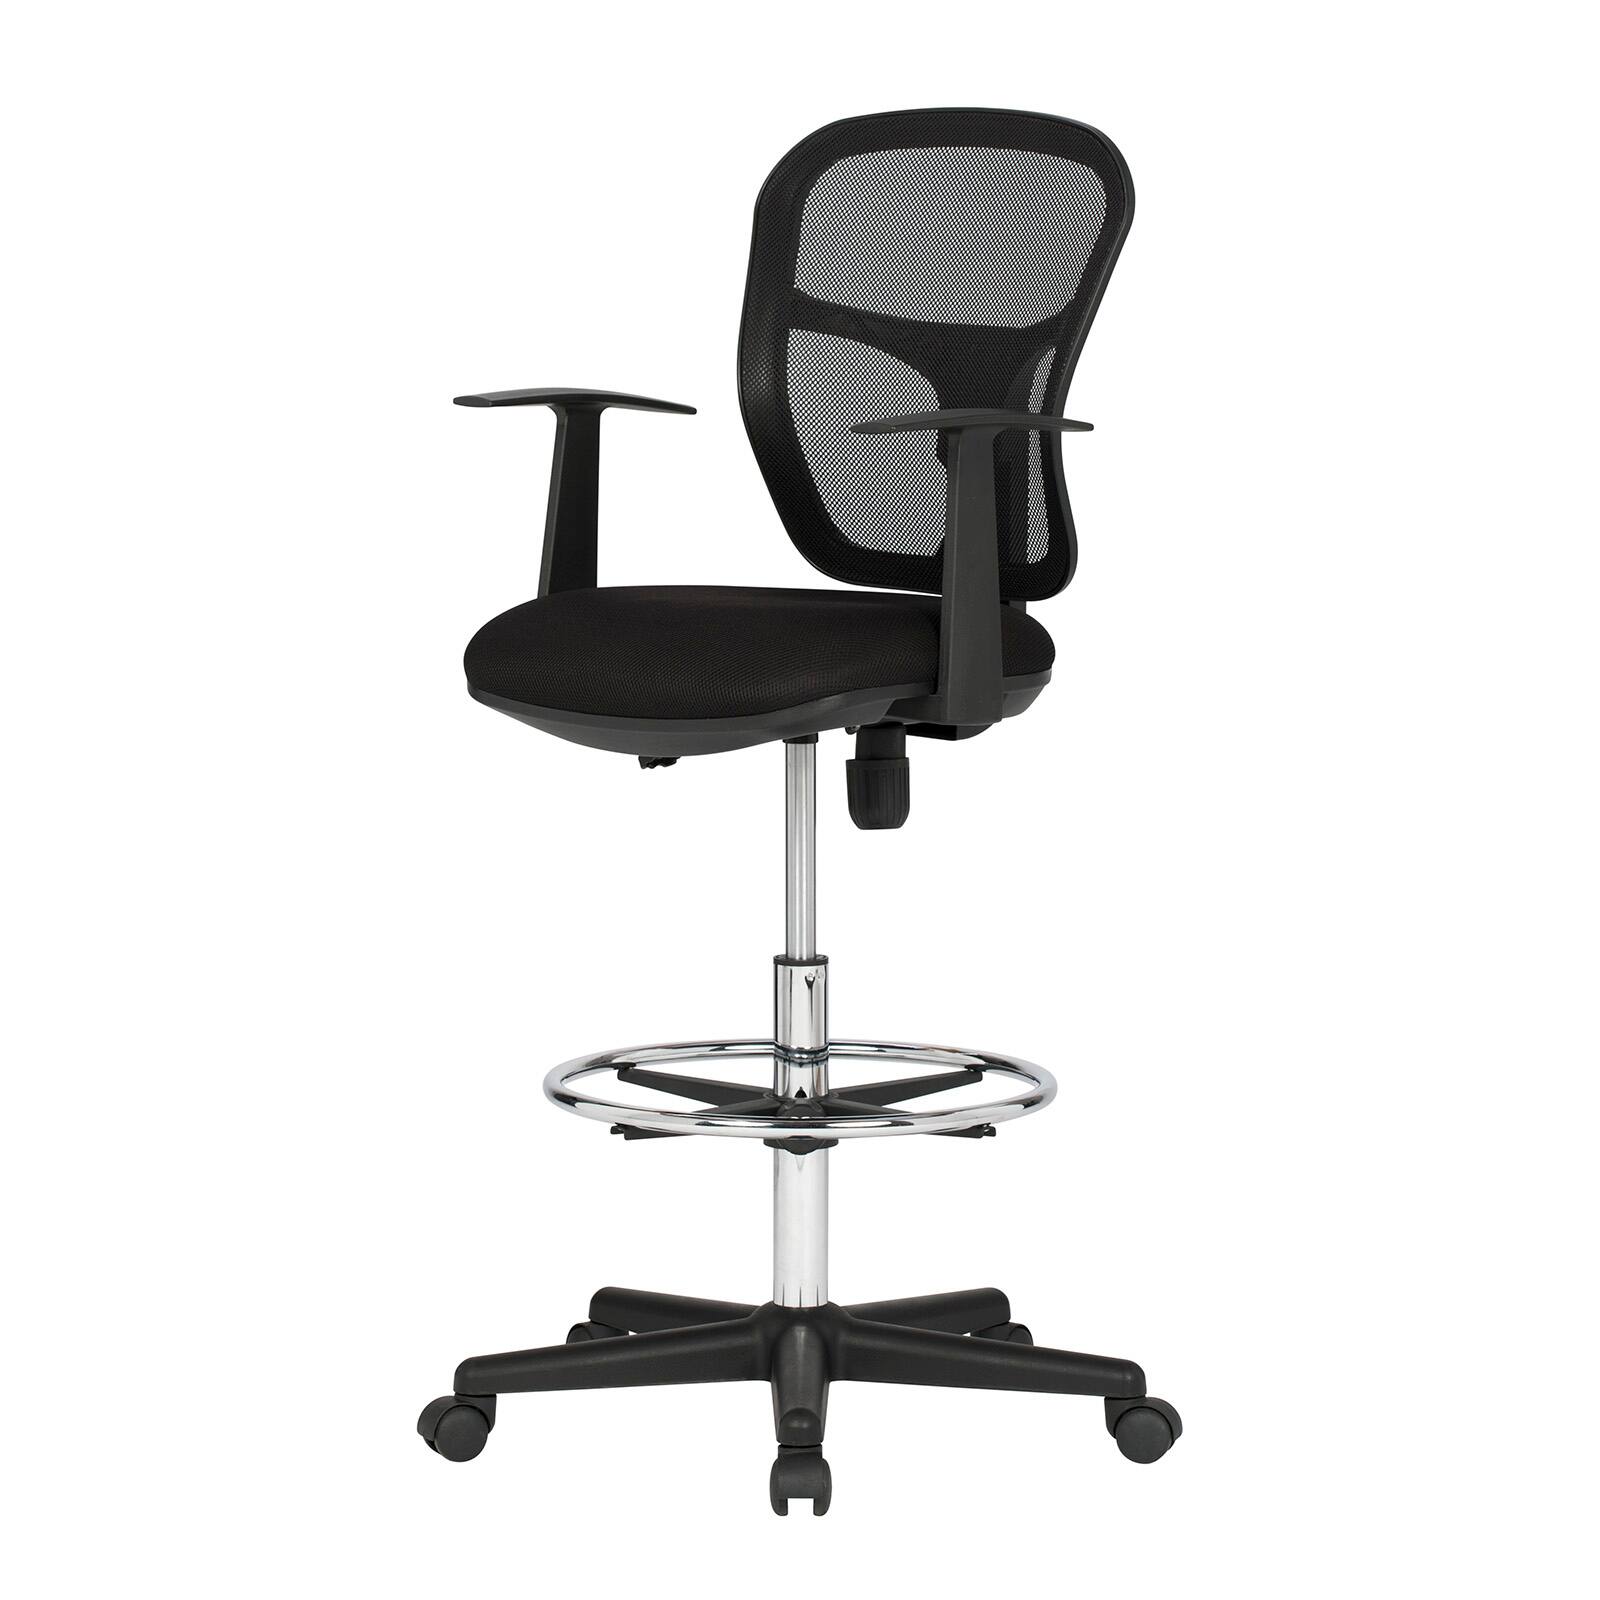 Studio Designs Riviera Height Adjustable Drafting Chair with Mesh Back